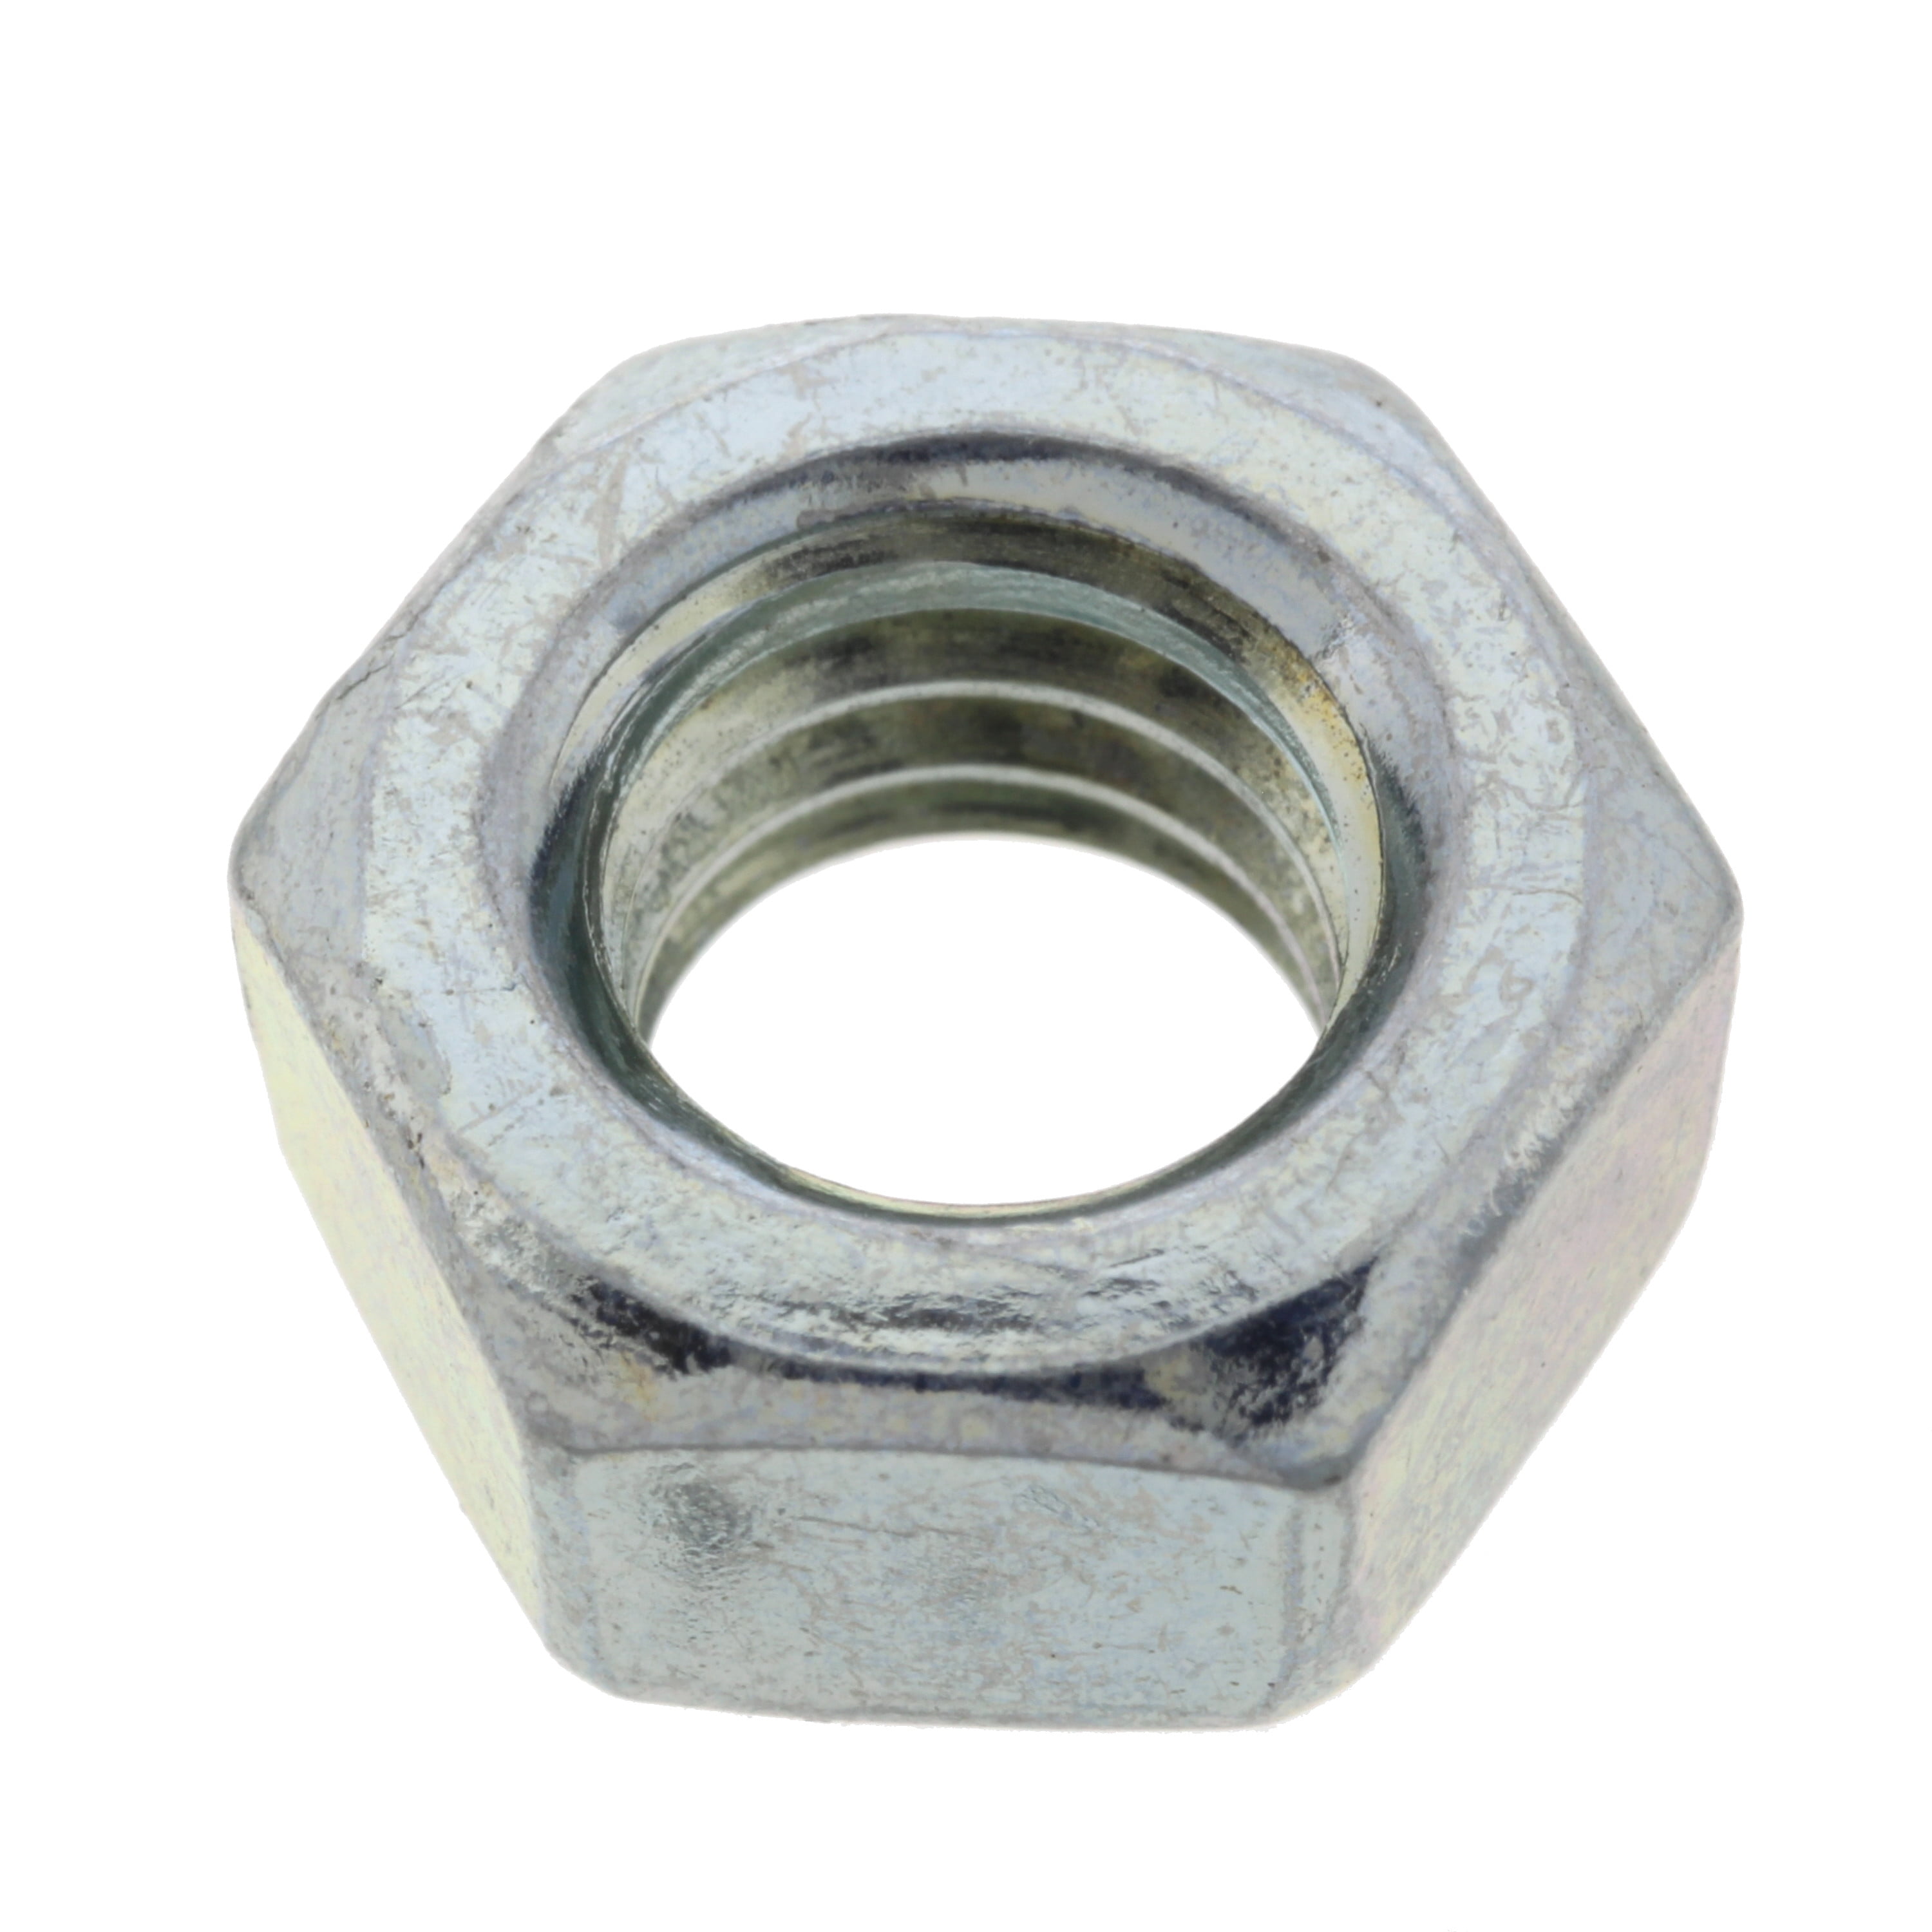 Zinc Plated Grade 5 Steel Hex Nuts Grade 5 Zinc Finished Nuts 1/4" to 2" 